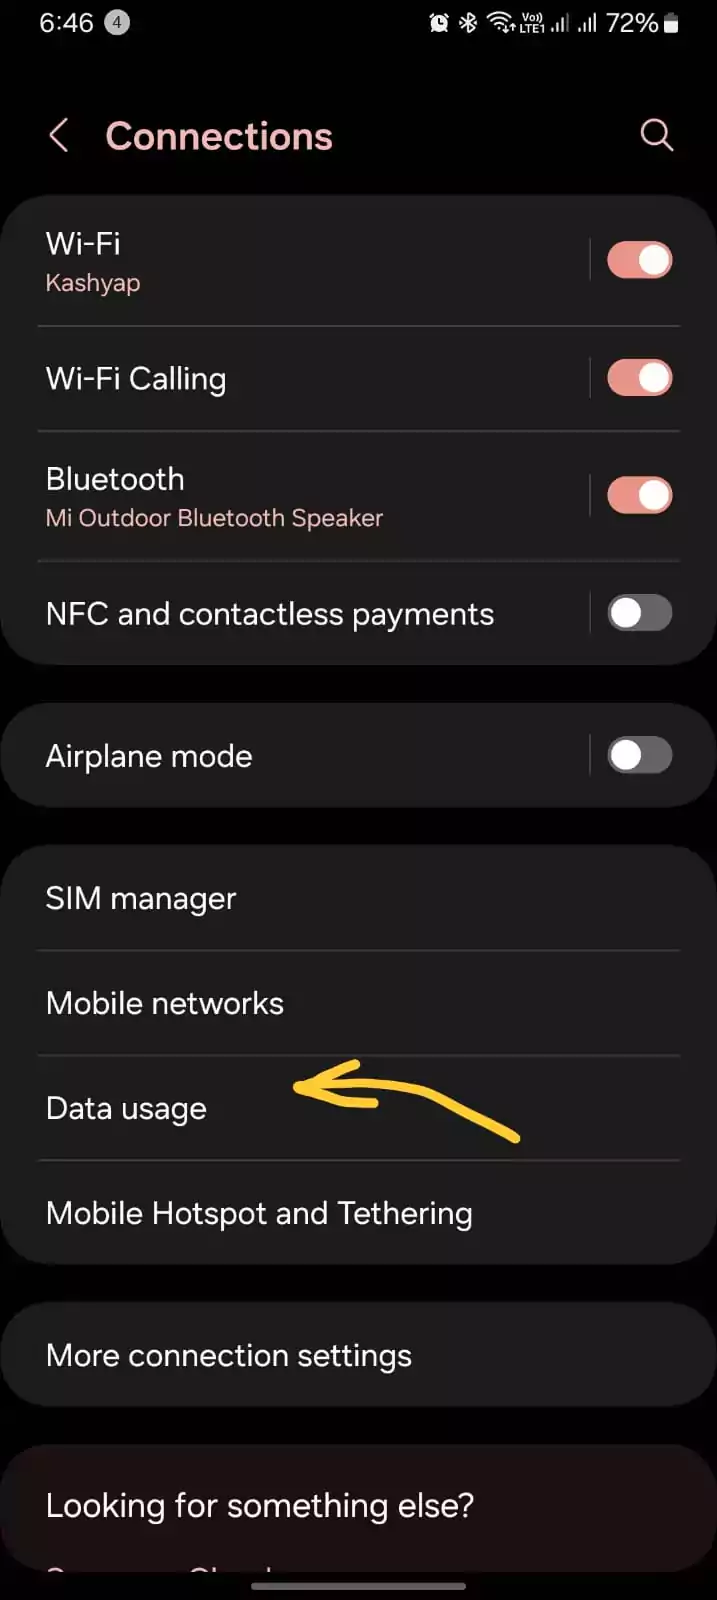 inside connections settings